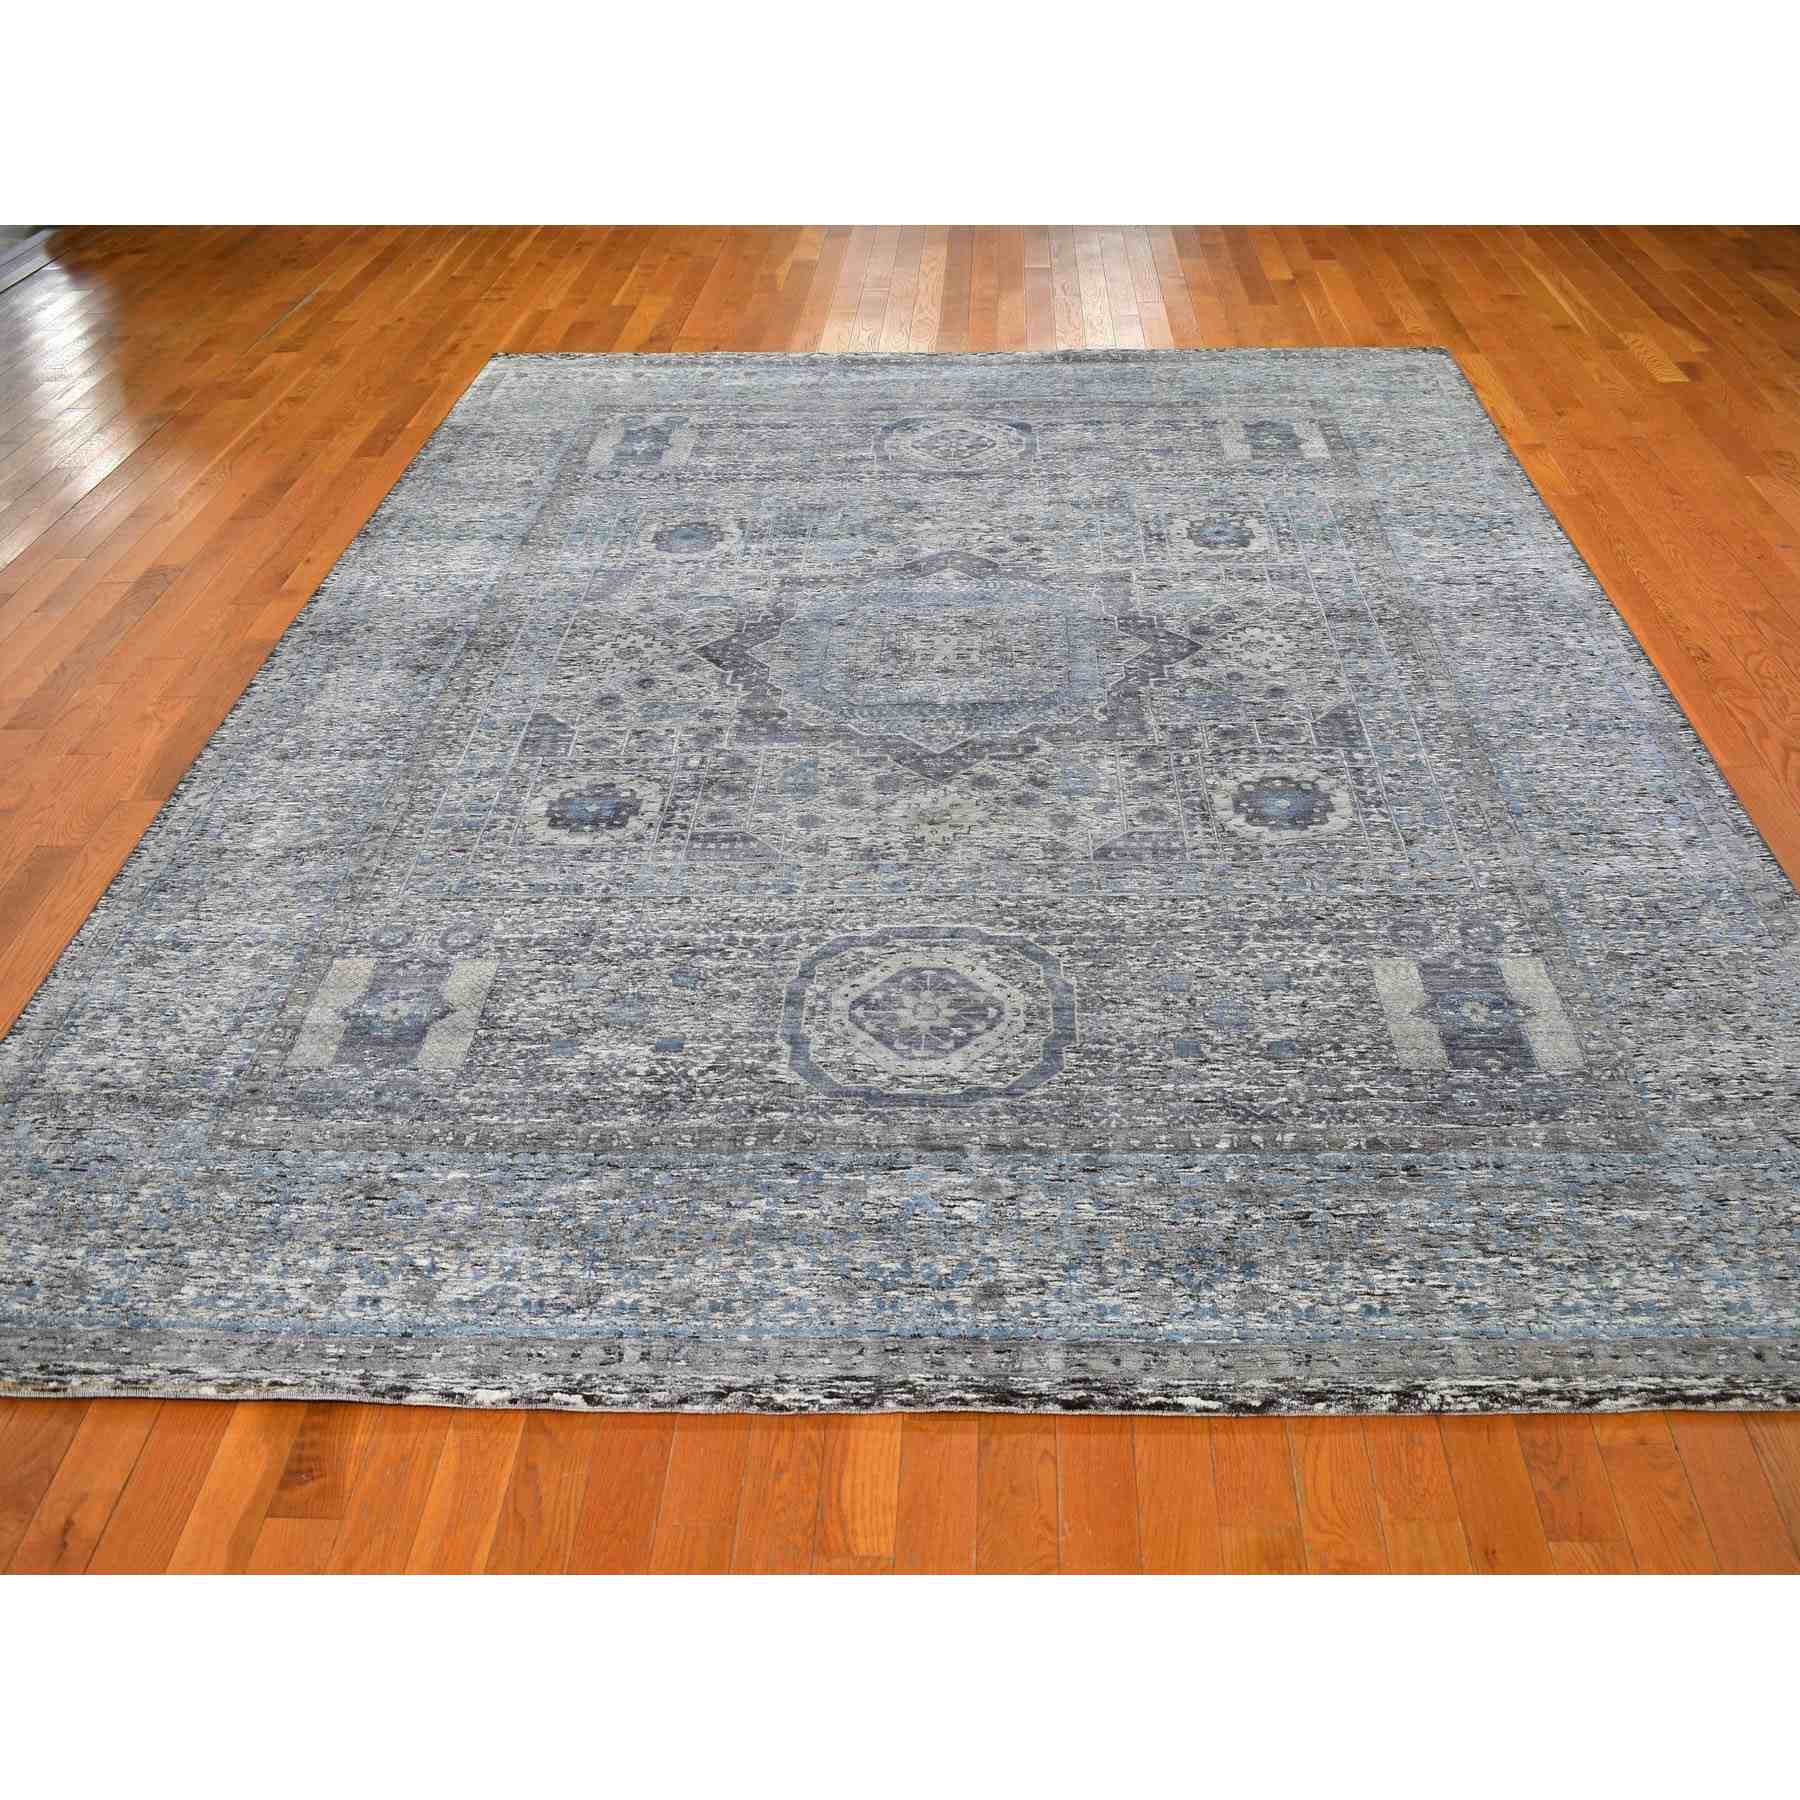 Silk With Textured Wool Hi-Low Pile Mamluk Design Hand Knotted Oriental ...